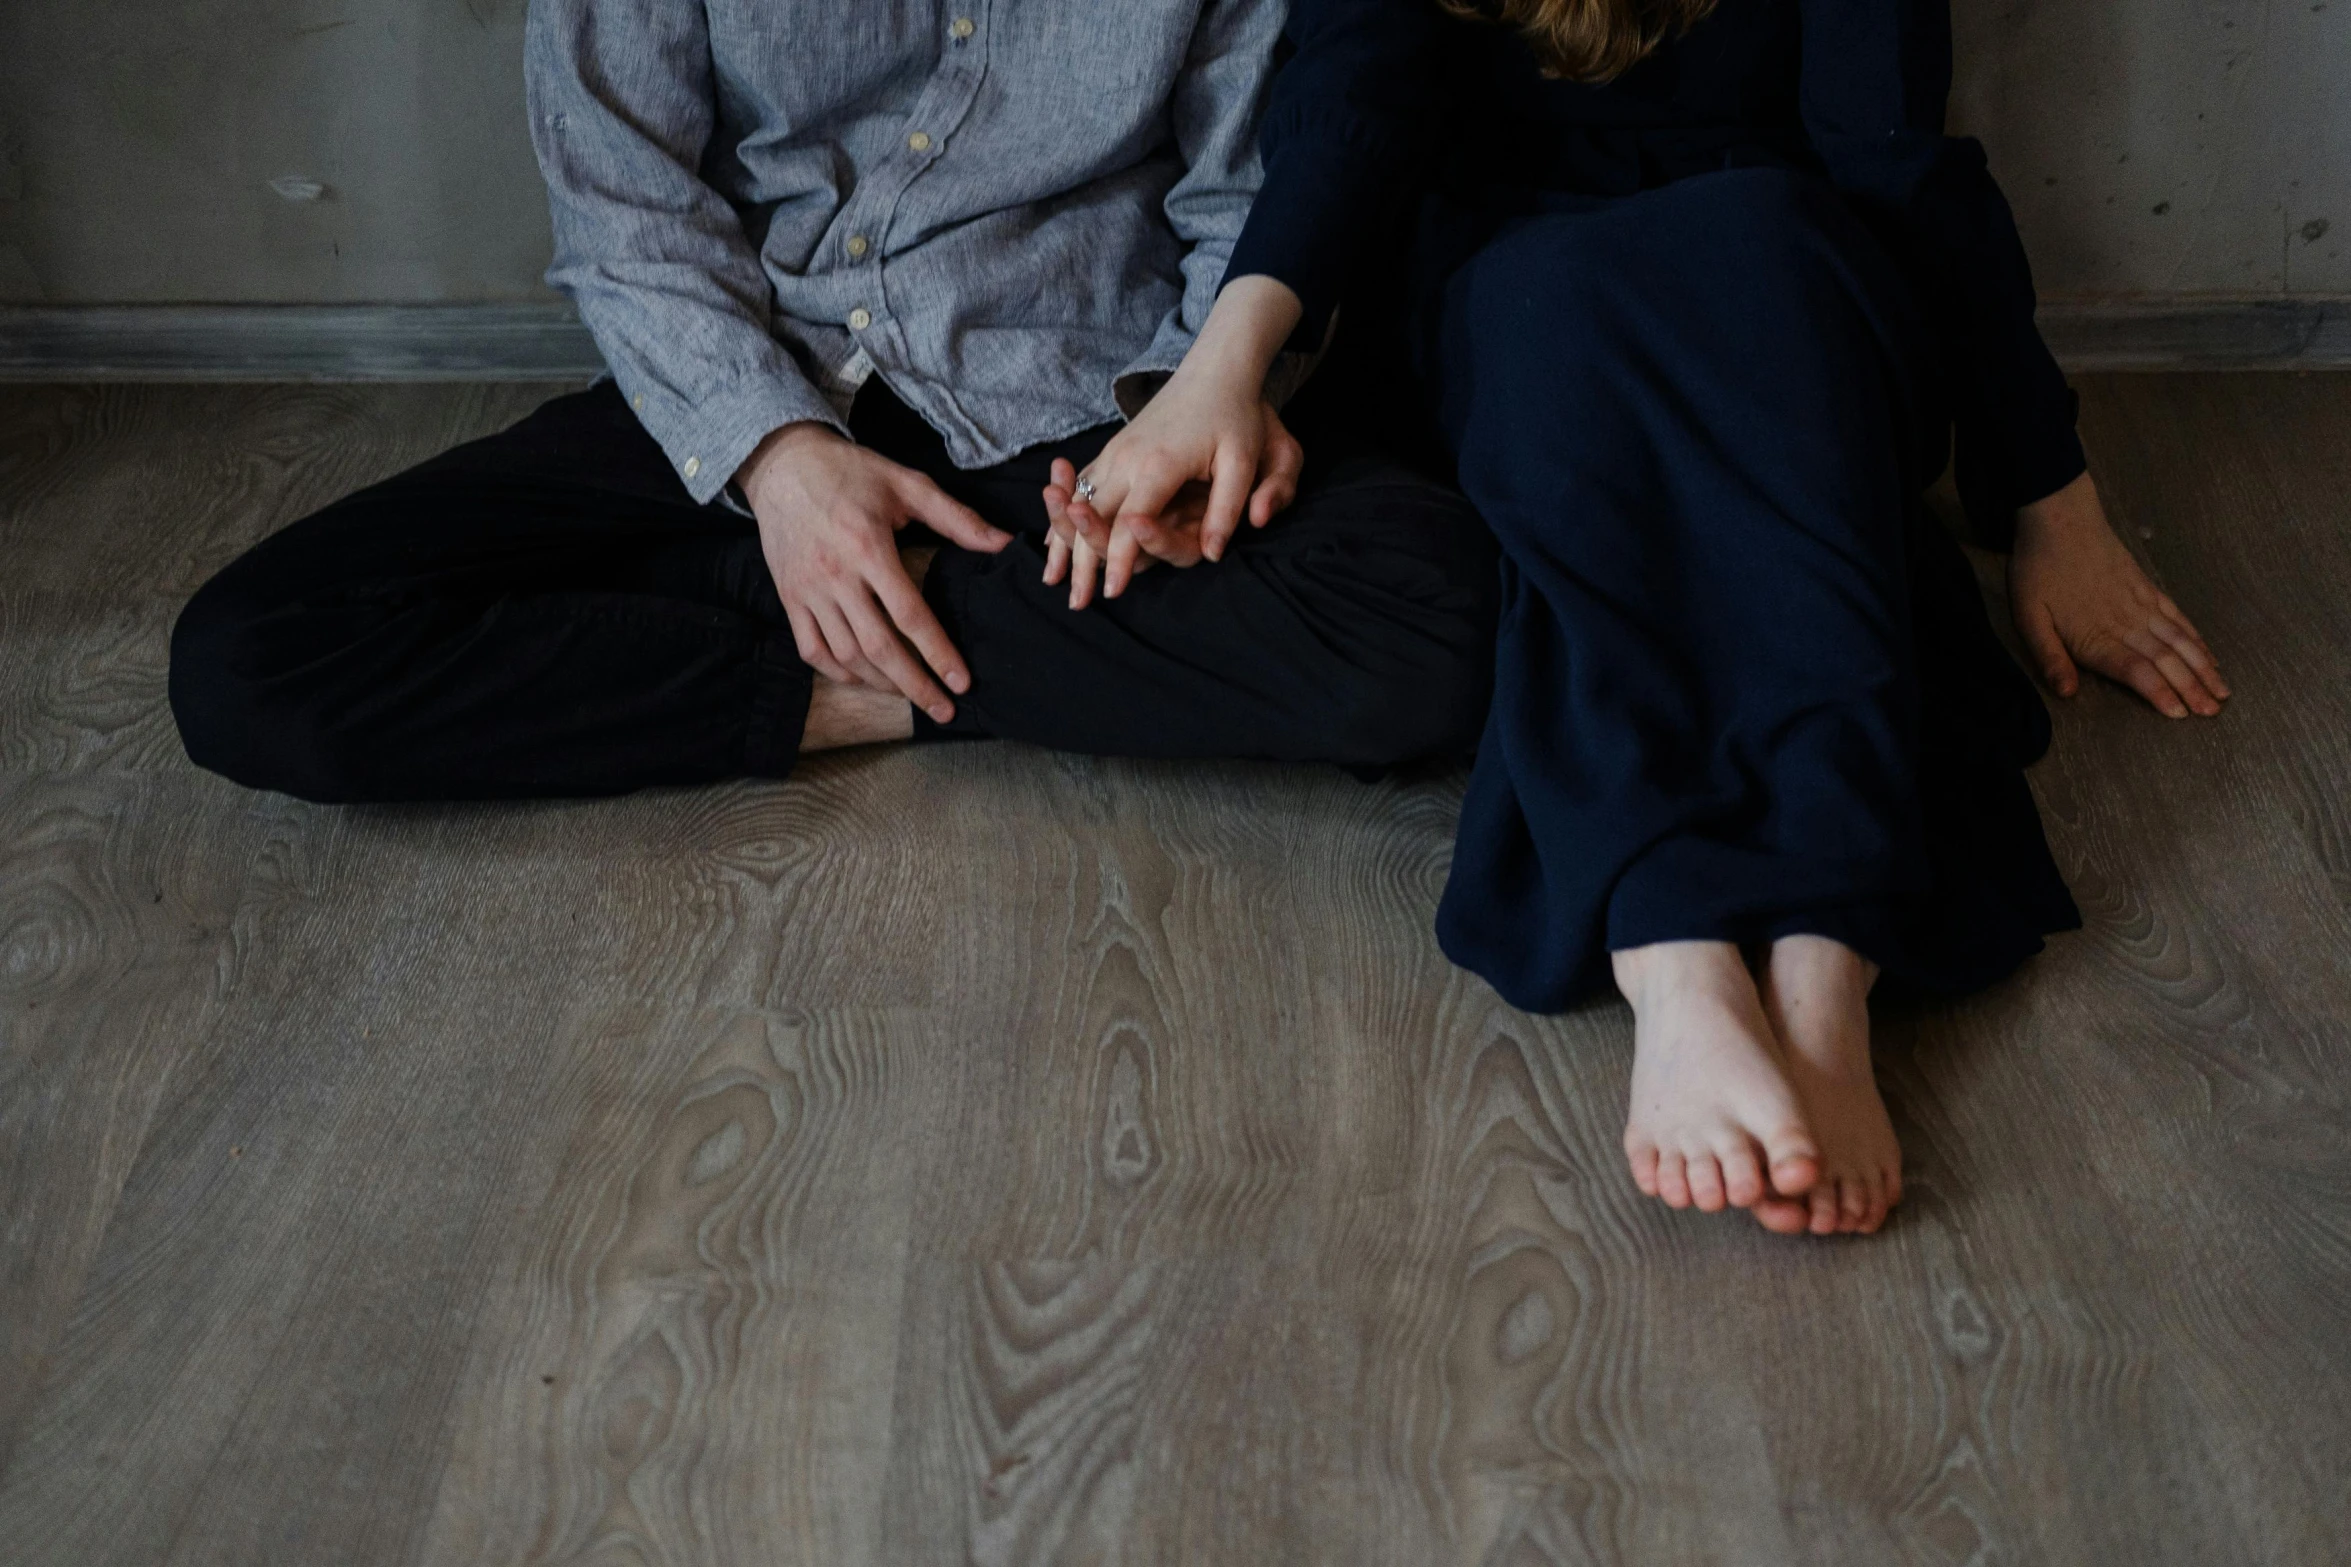 a man and a woman sitting on the floor, wooden floors, profile image, hands not visible, dasha taran